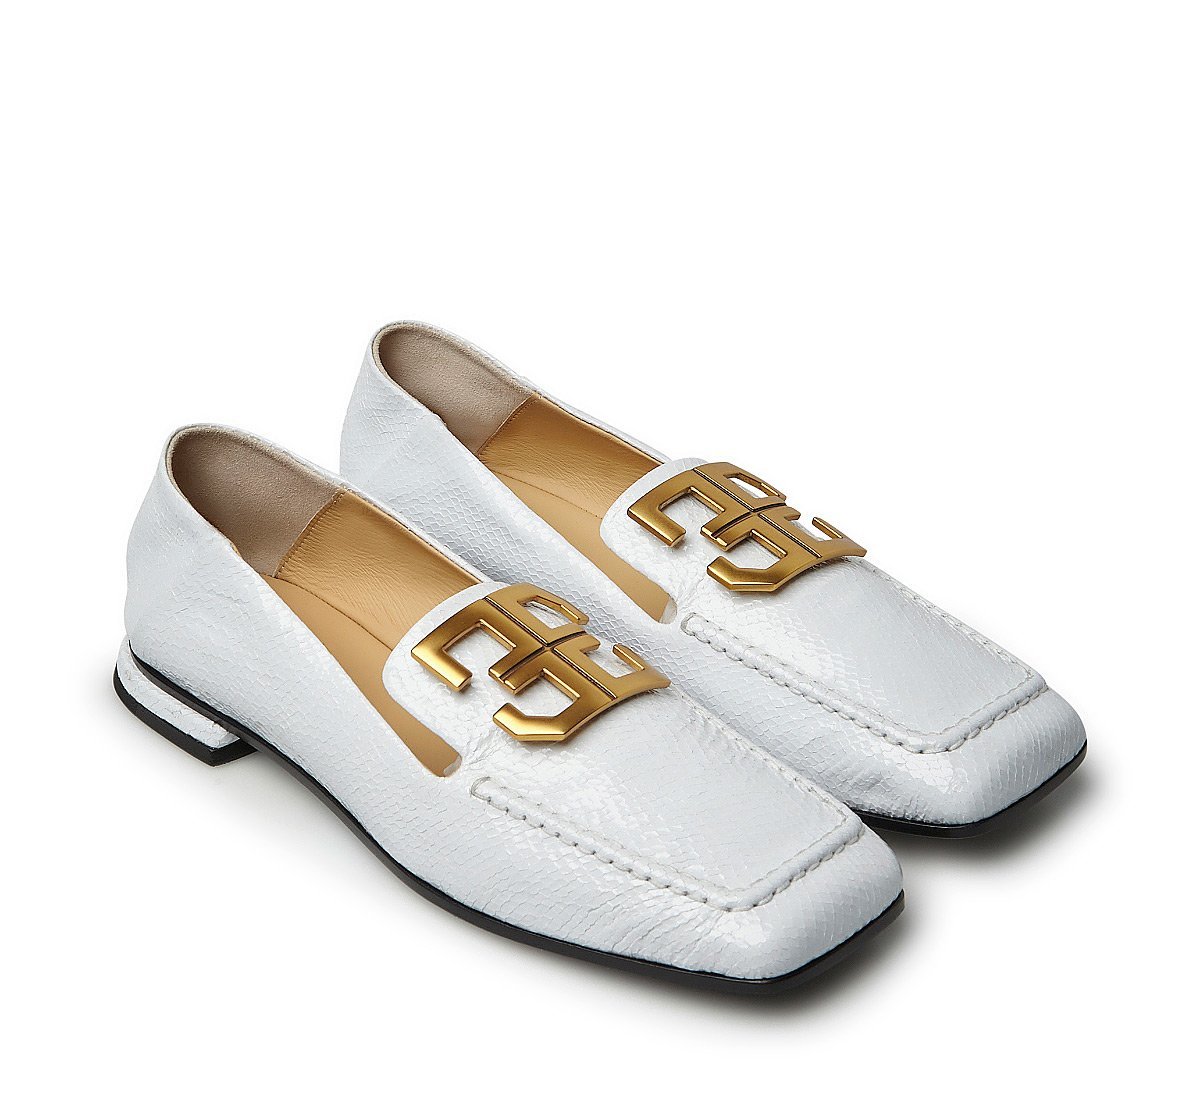 Loafer in exquisite calfskin